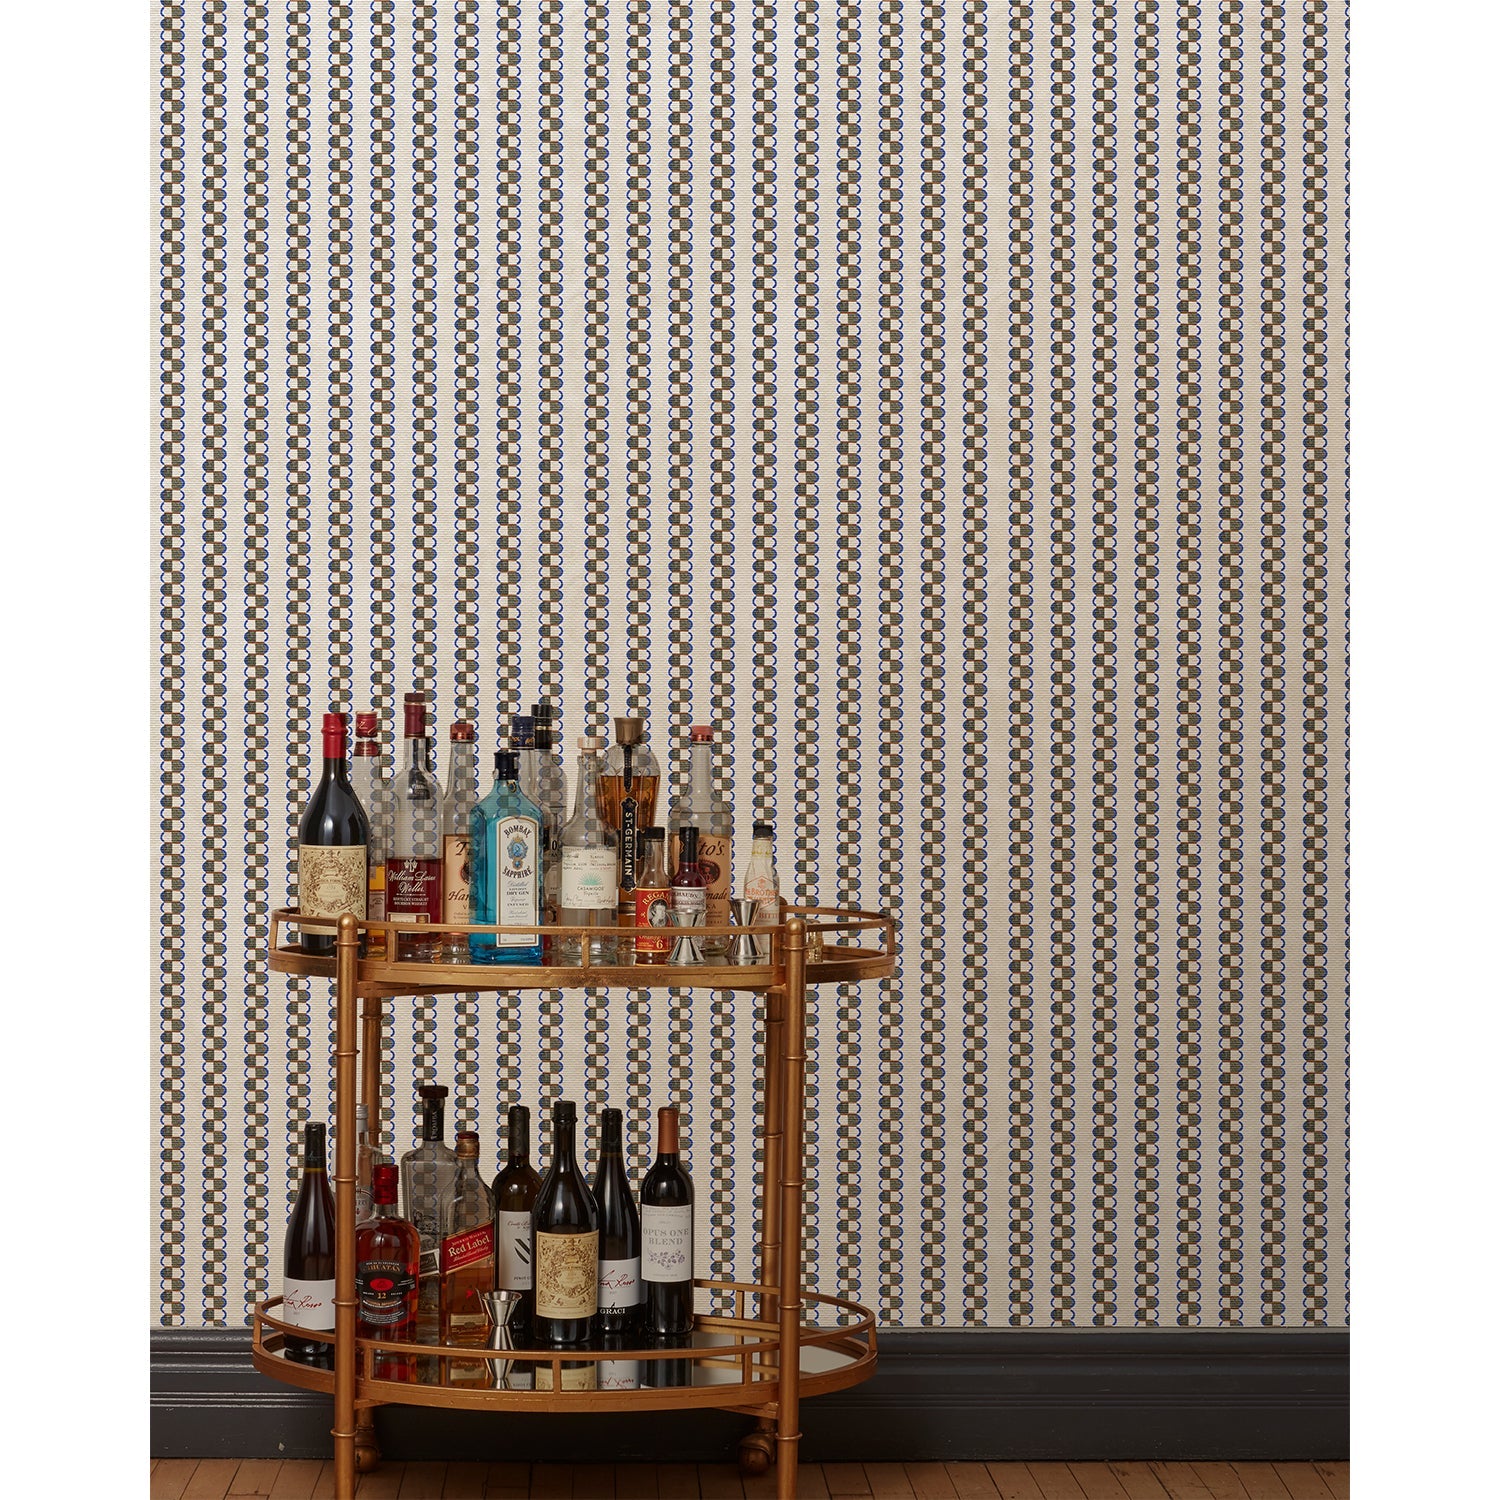 A bronze bar cart in front of a wall papered in a repeating mosaic stripe print in shades of blue, rust and gray on a cream field.